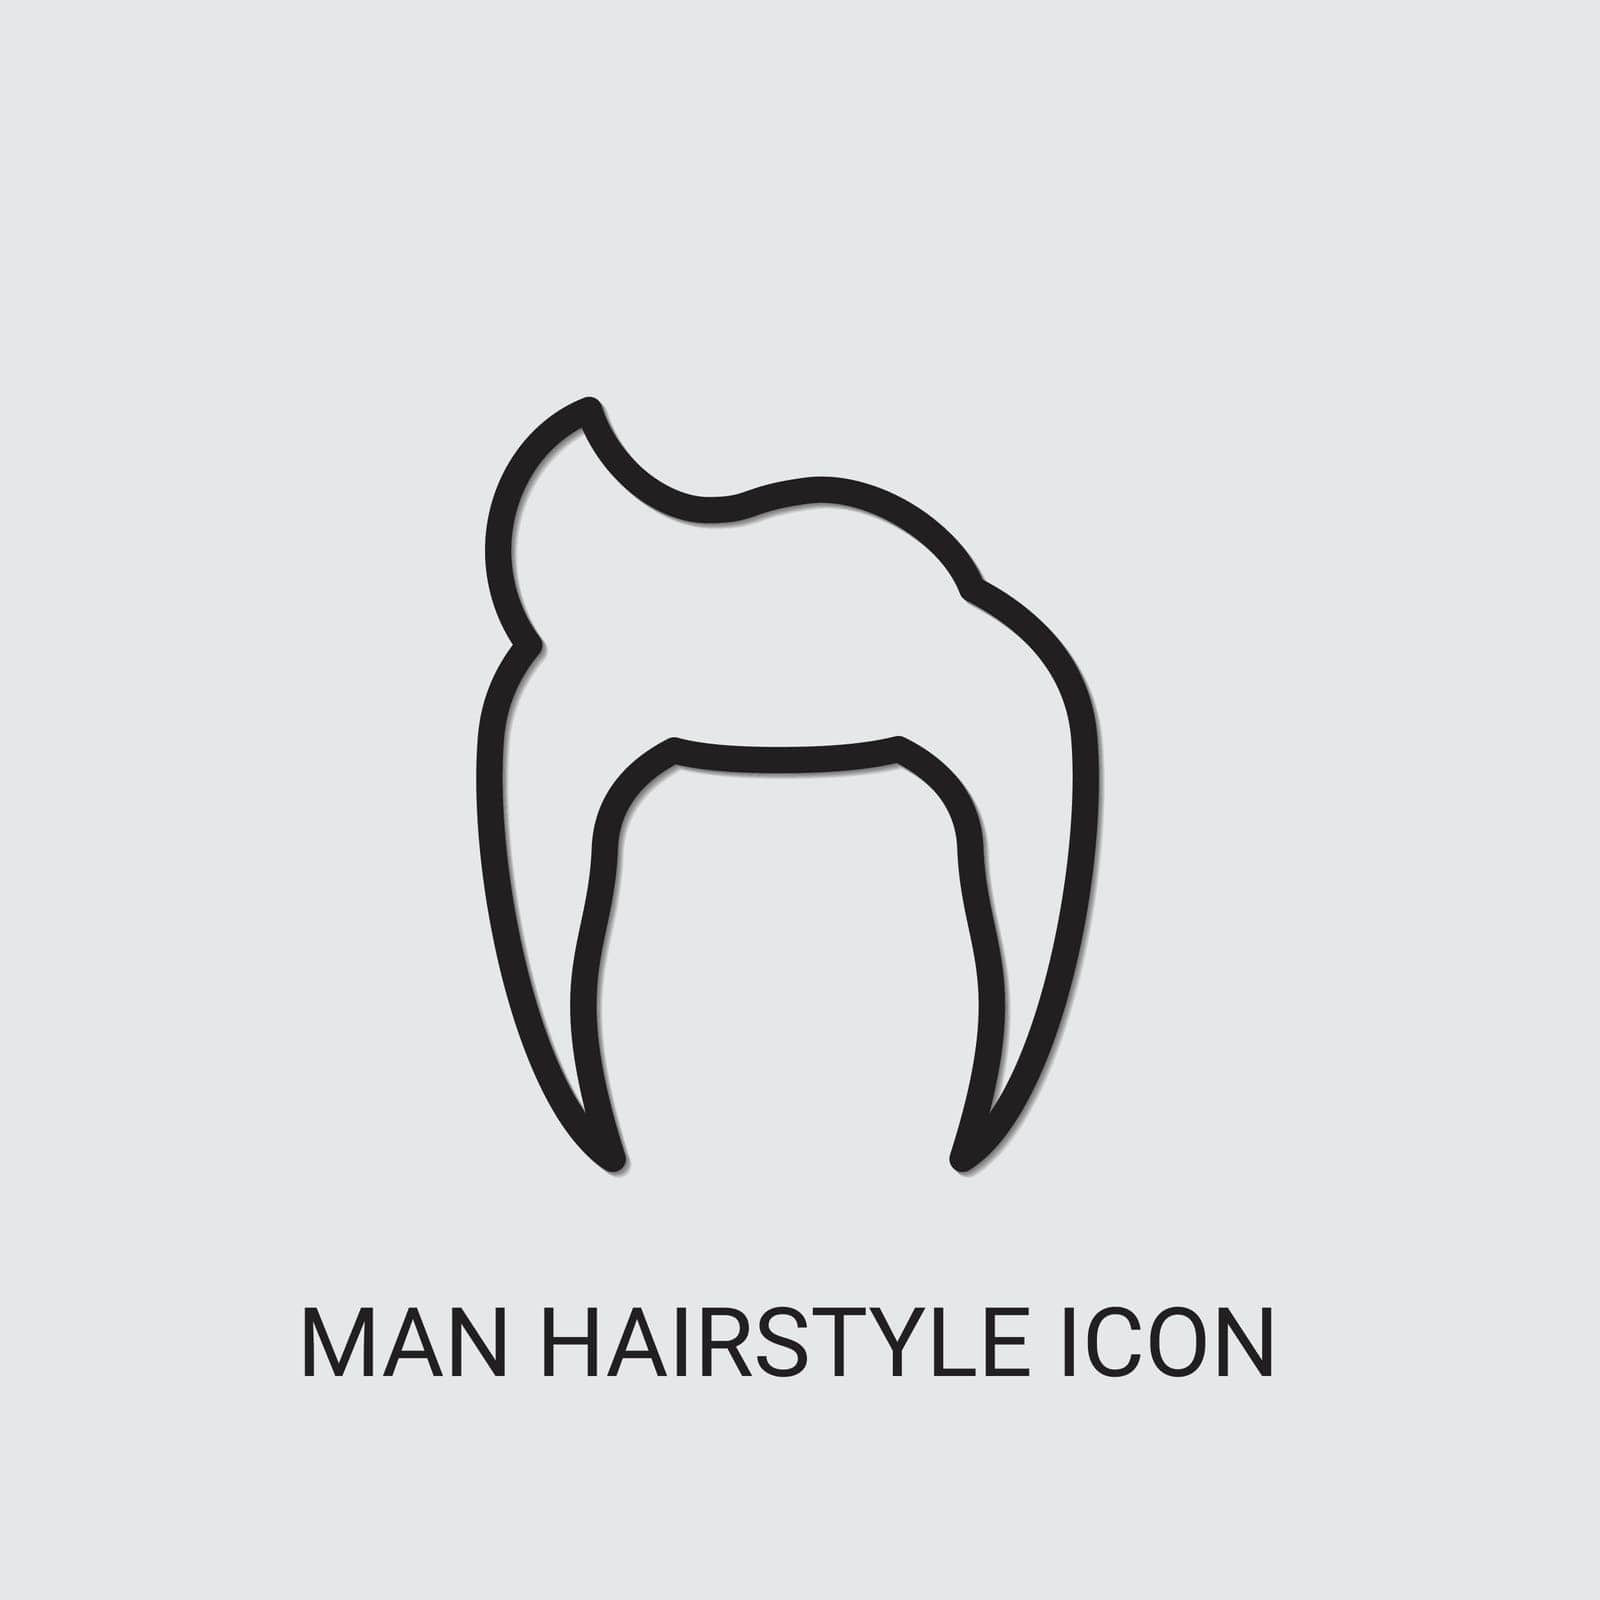 symbol,shop,icon,mustache,hair,outline,design,men,vector,man,barber,shave,facial,set,beard,retro,chop,collection,haircut,hairstyle,face,classic,goatee,silhouette,handlebar,style,illustration,disguise,male,fashion